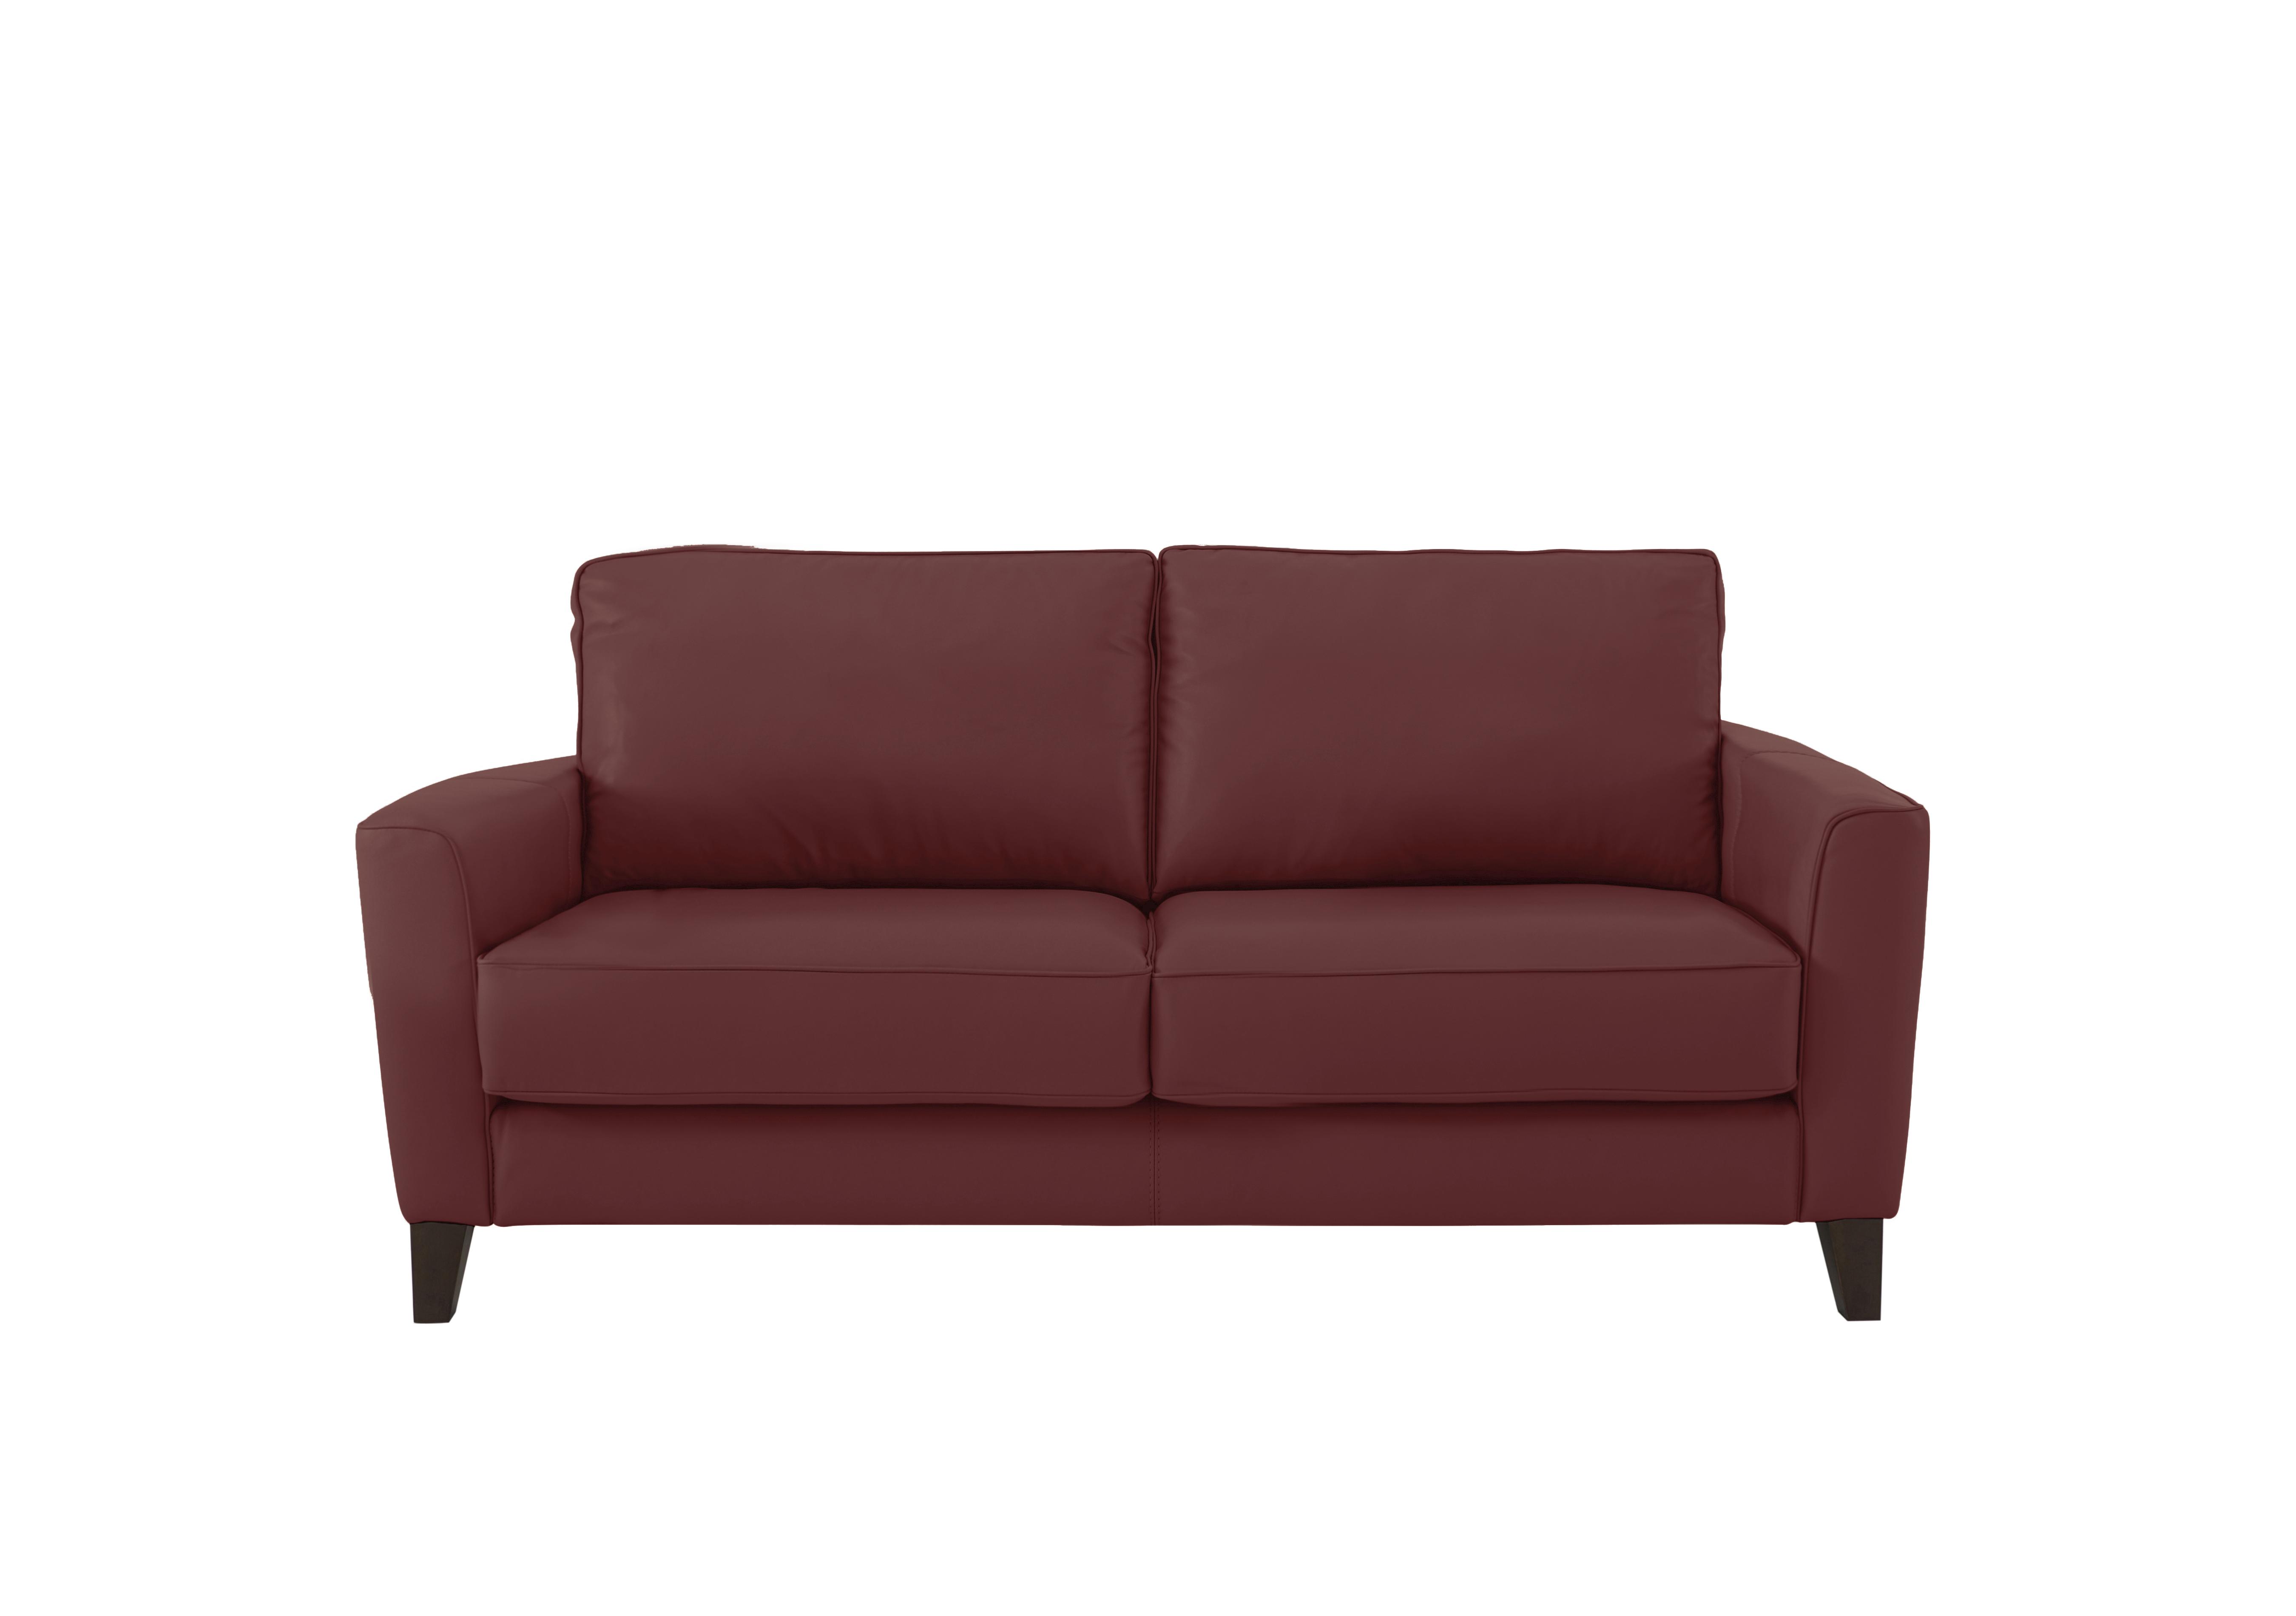 Brondby 2 Seater Leather Sofa in Bv-035c Deep Red on Furniture Village